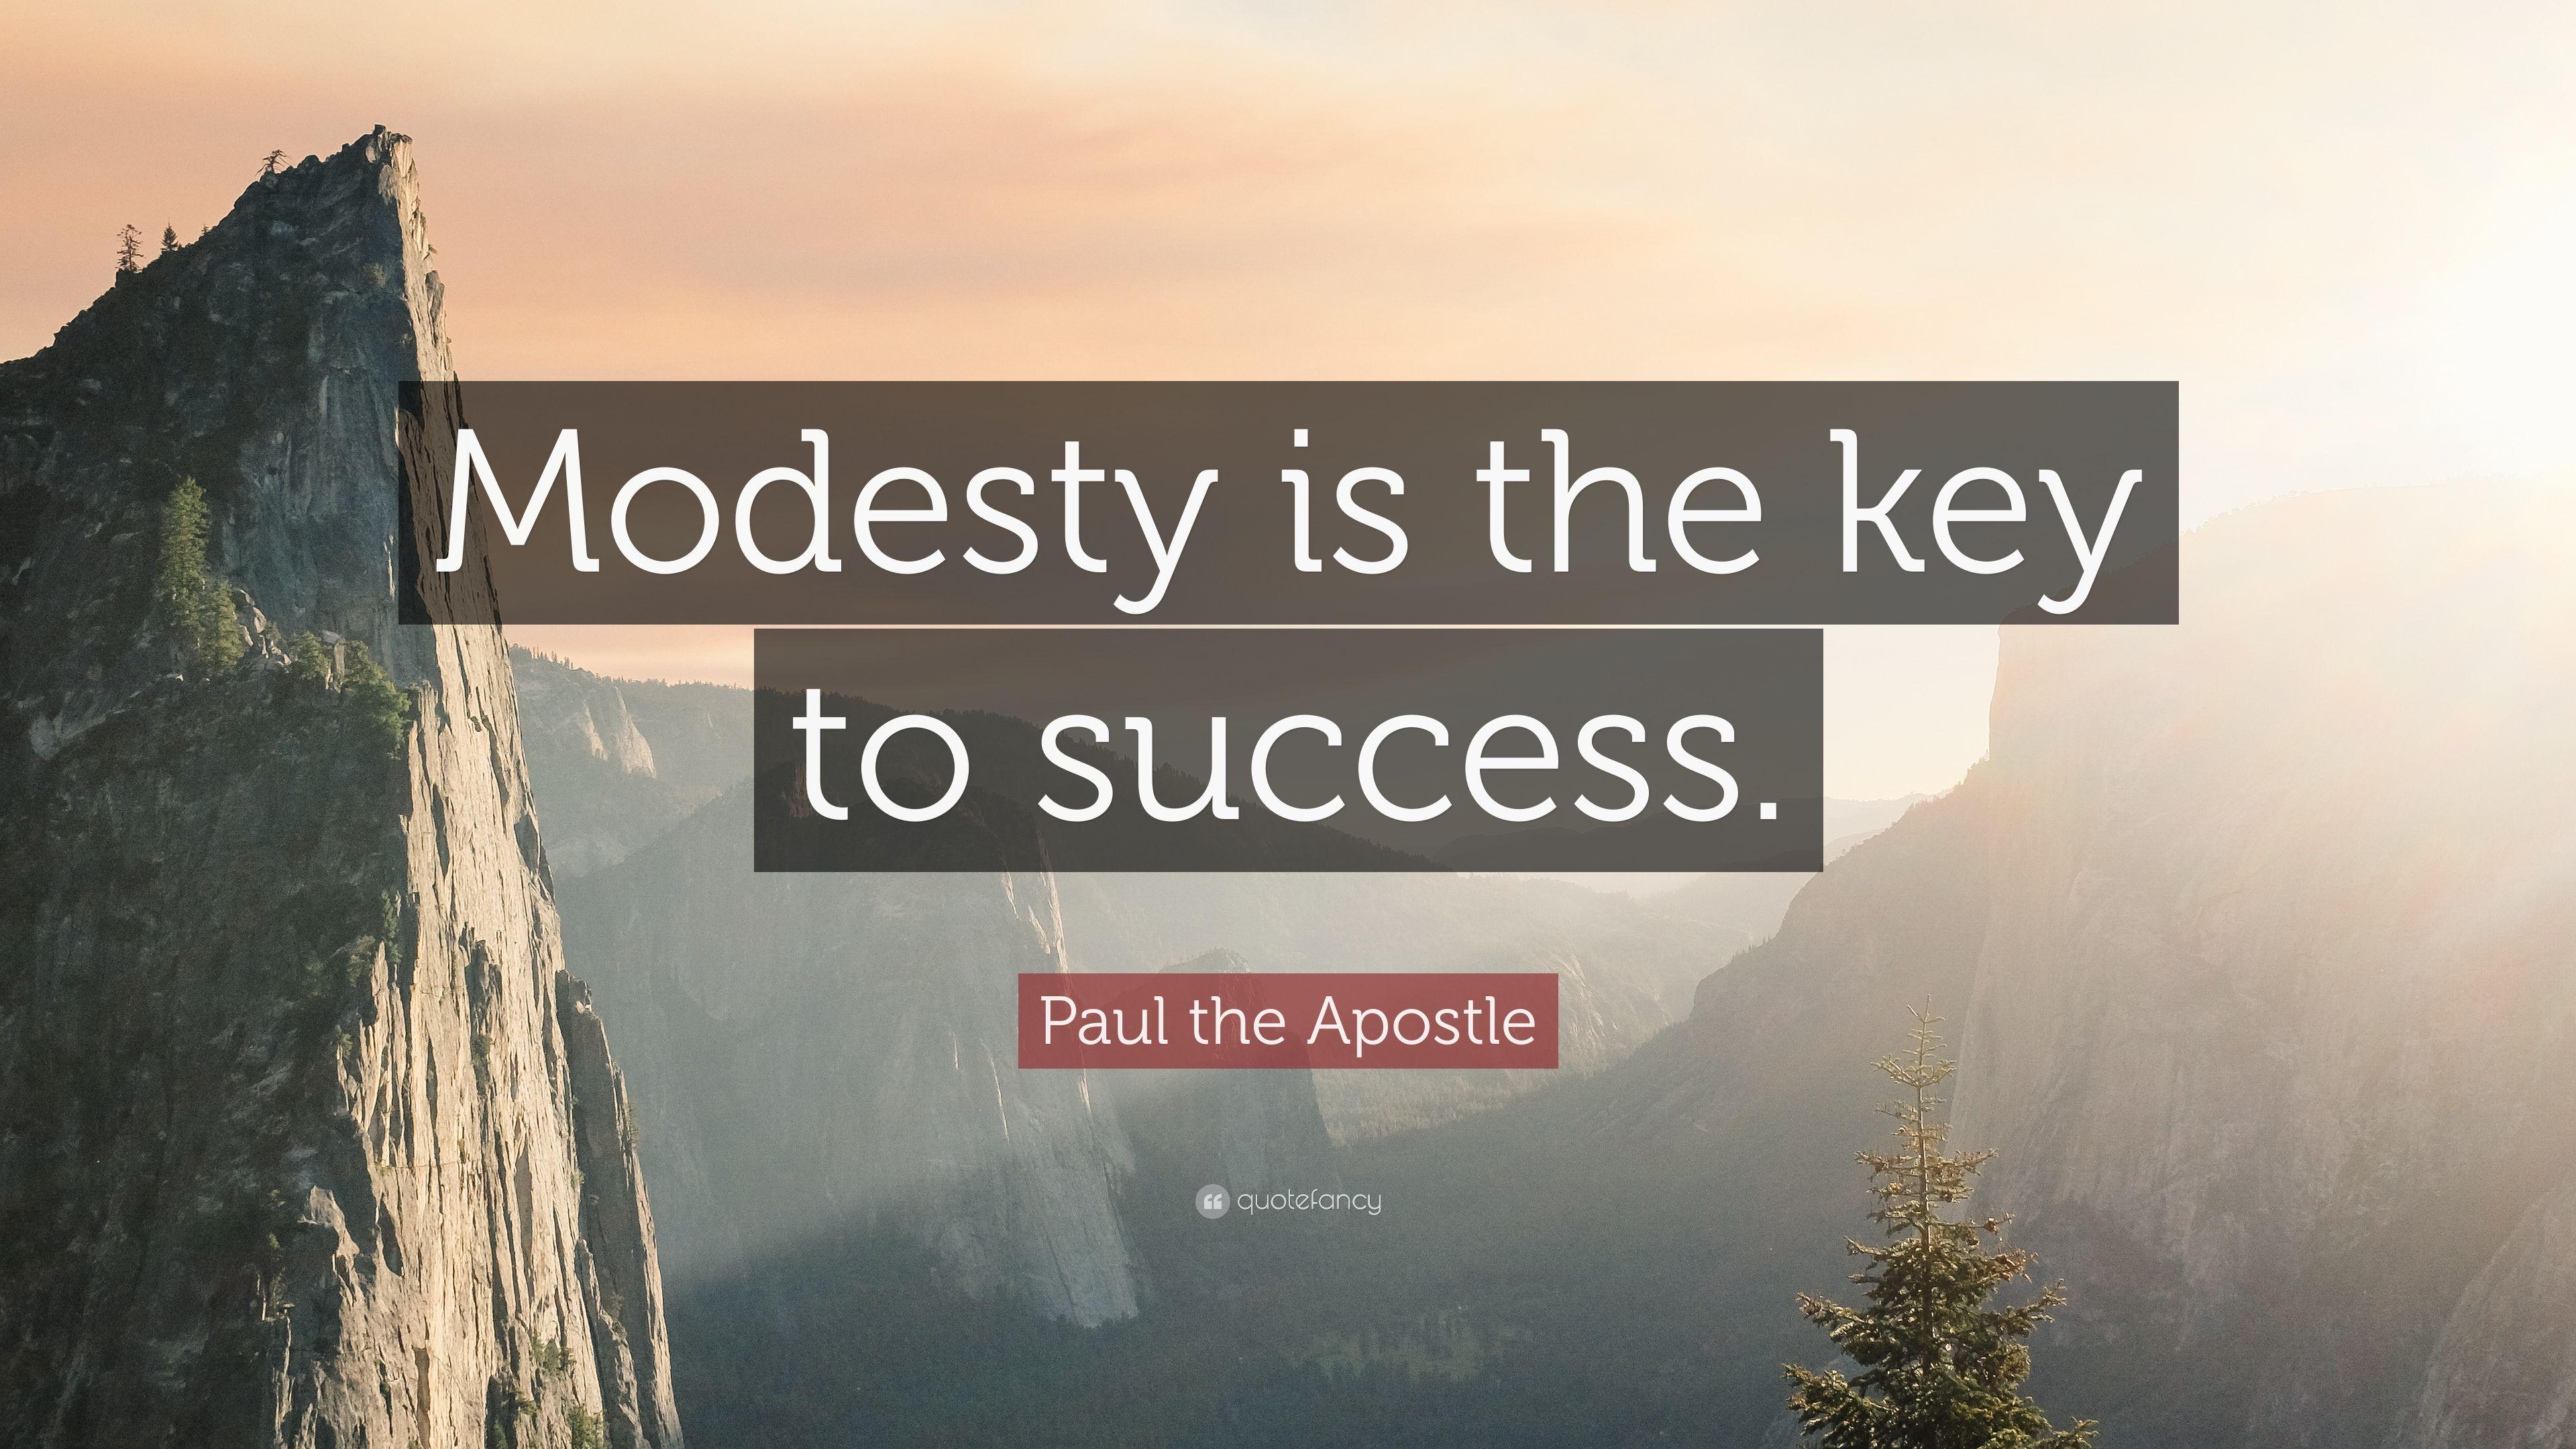 Paul the Apostle Quote: “Modesty is the key to success.” 9